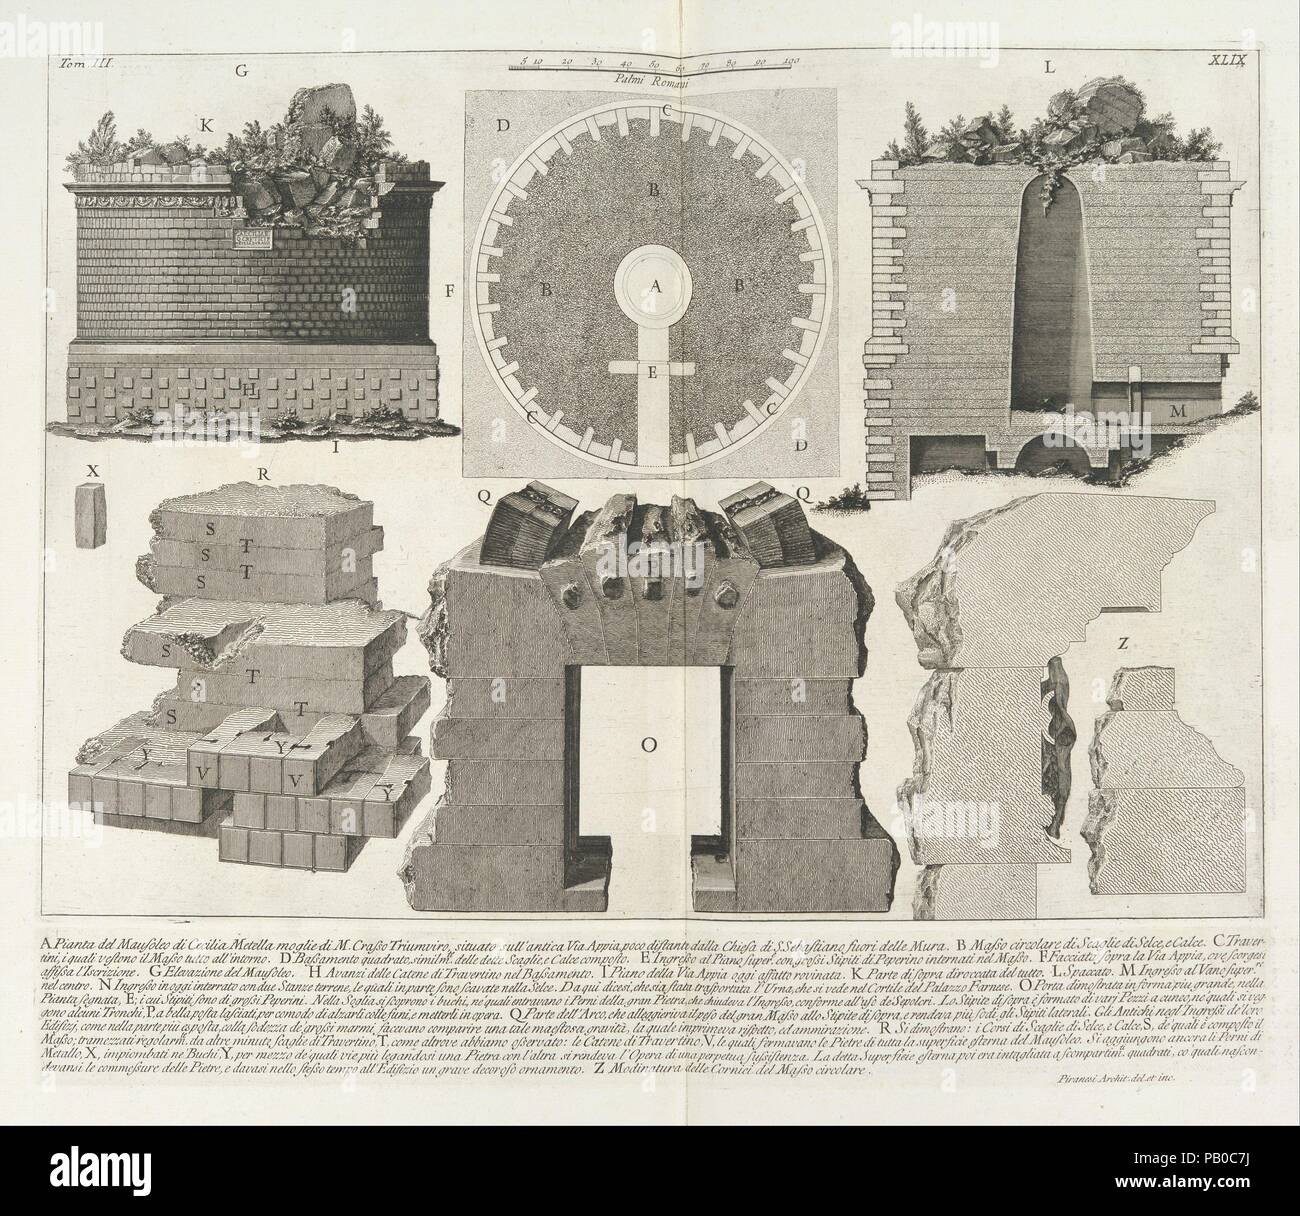 Plan of the Mausoleum of Caecilia Metella, wife of the Triumvir Marcus Crassus...,  from Le Antichità Romane (Roman Antiquities), tome 3, tavola 49. Artist: Giovanni Battista Piranesi (Italian, Mogliano Veneto 1720-1778 Rome). Dimensions: Sheet: 21 1/4 x 30 5/16 in. (54 x 77 cm)  Plate: 17 5/16 x 20 1/2 in. (44 x 52 cm). Publisher: Angelo Rotili. Series/Portfolio: Le Antichità Romane, tome 3. Date: published 1756-57.  While Piranesi's 'Vedute' record the present appearance of the relics of antiquity, he also dug deeper, investigating the engineering feats of the ancient Romans and attempting t Stock Photo